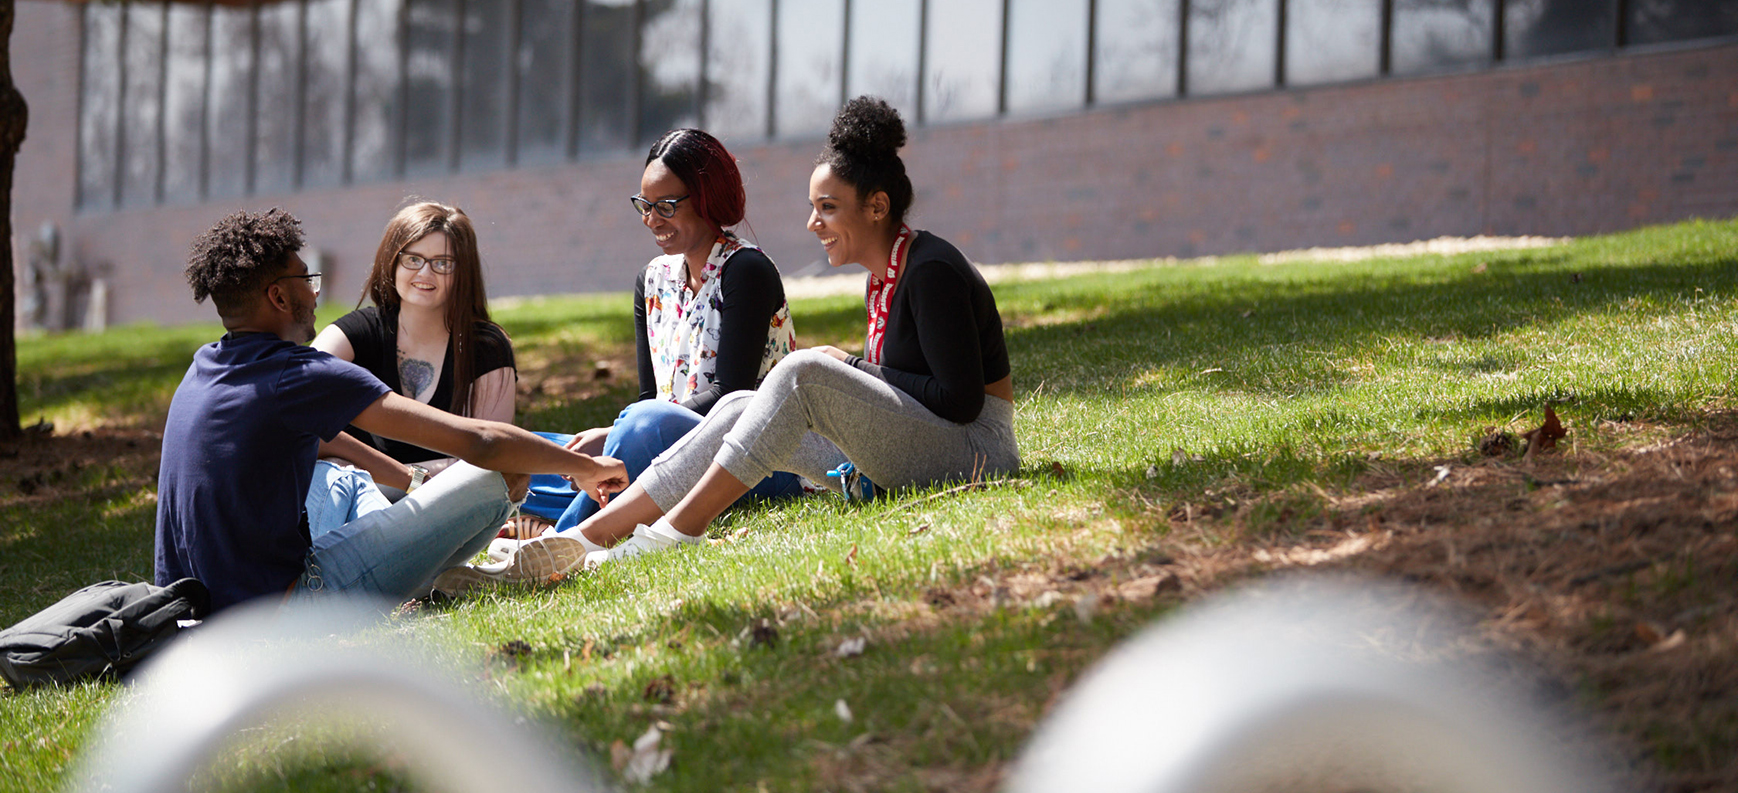 Students studying on grass near campus walkway